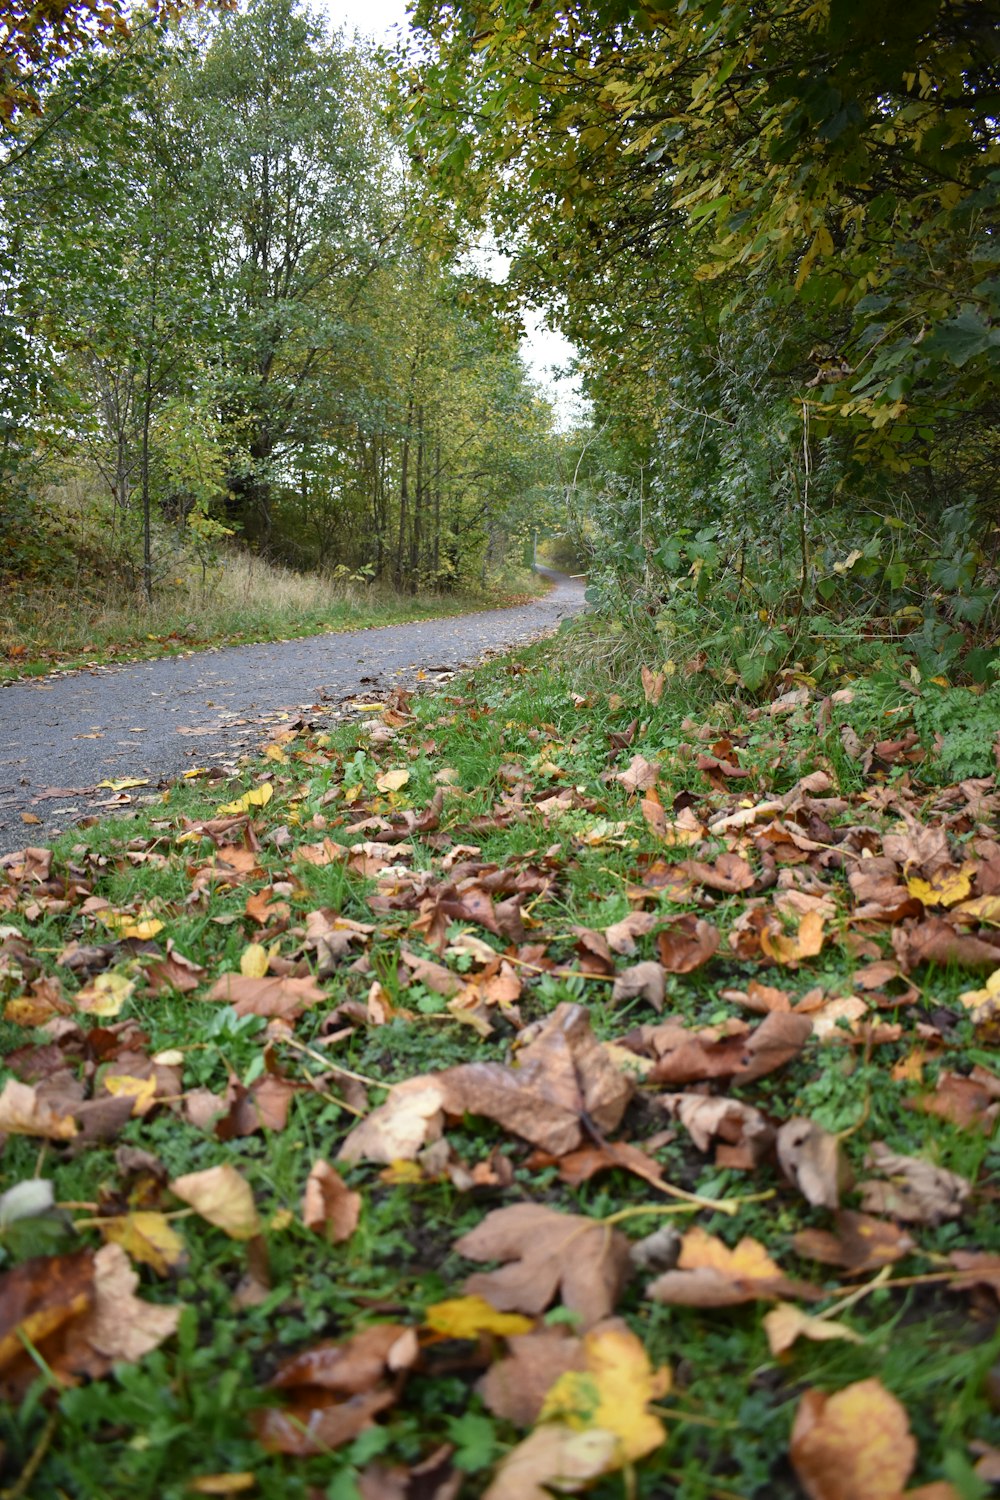 a road surrounded by trees and leaves on the ground